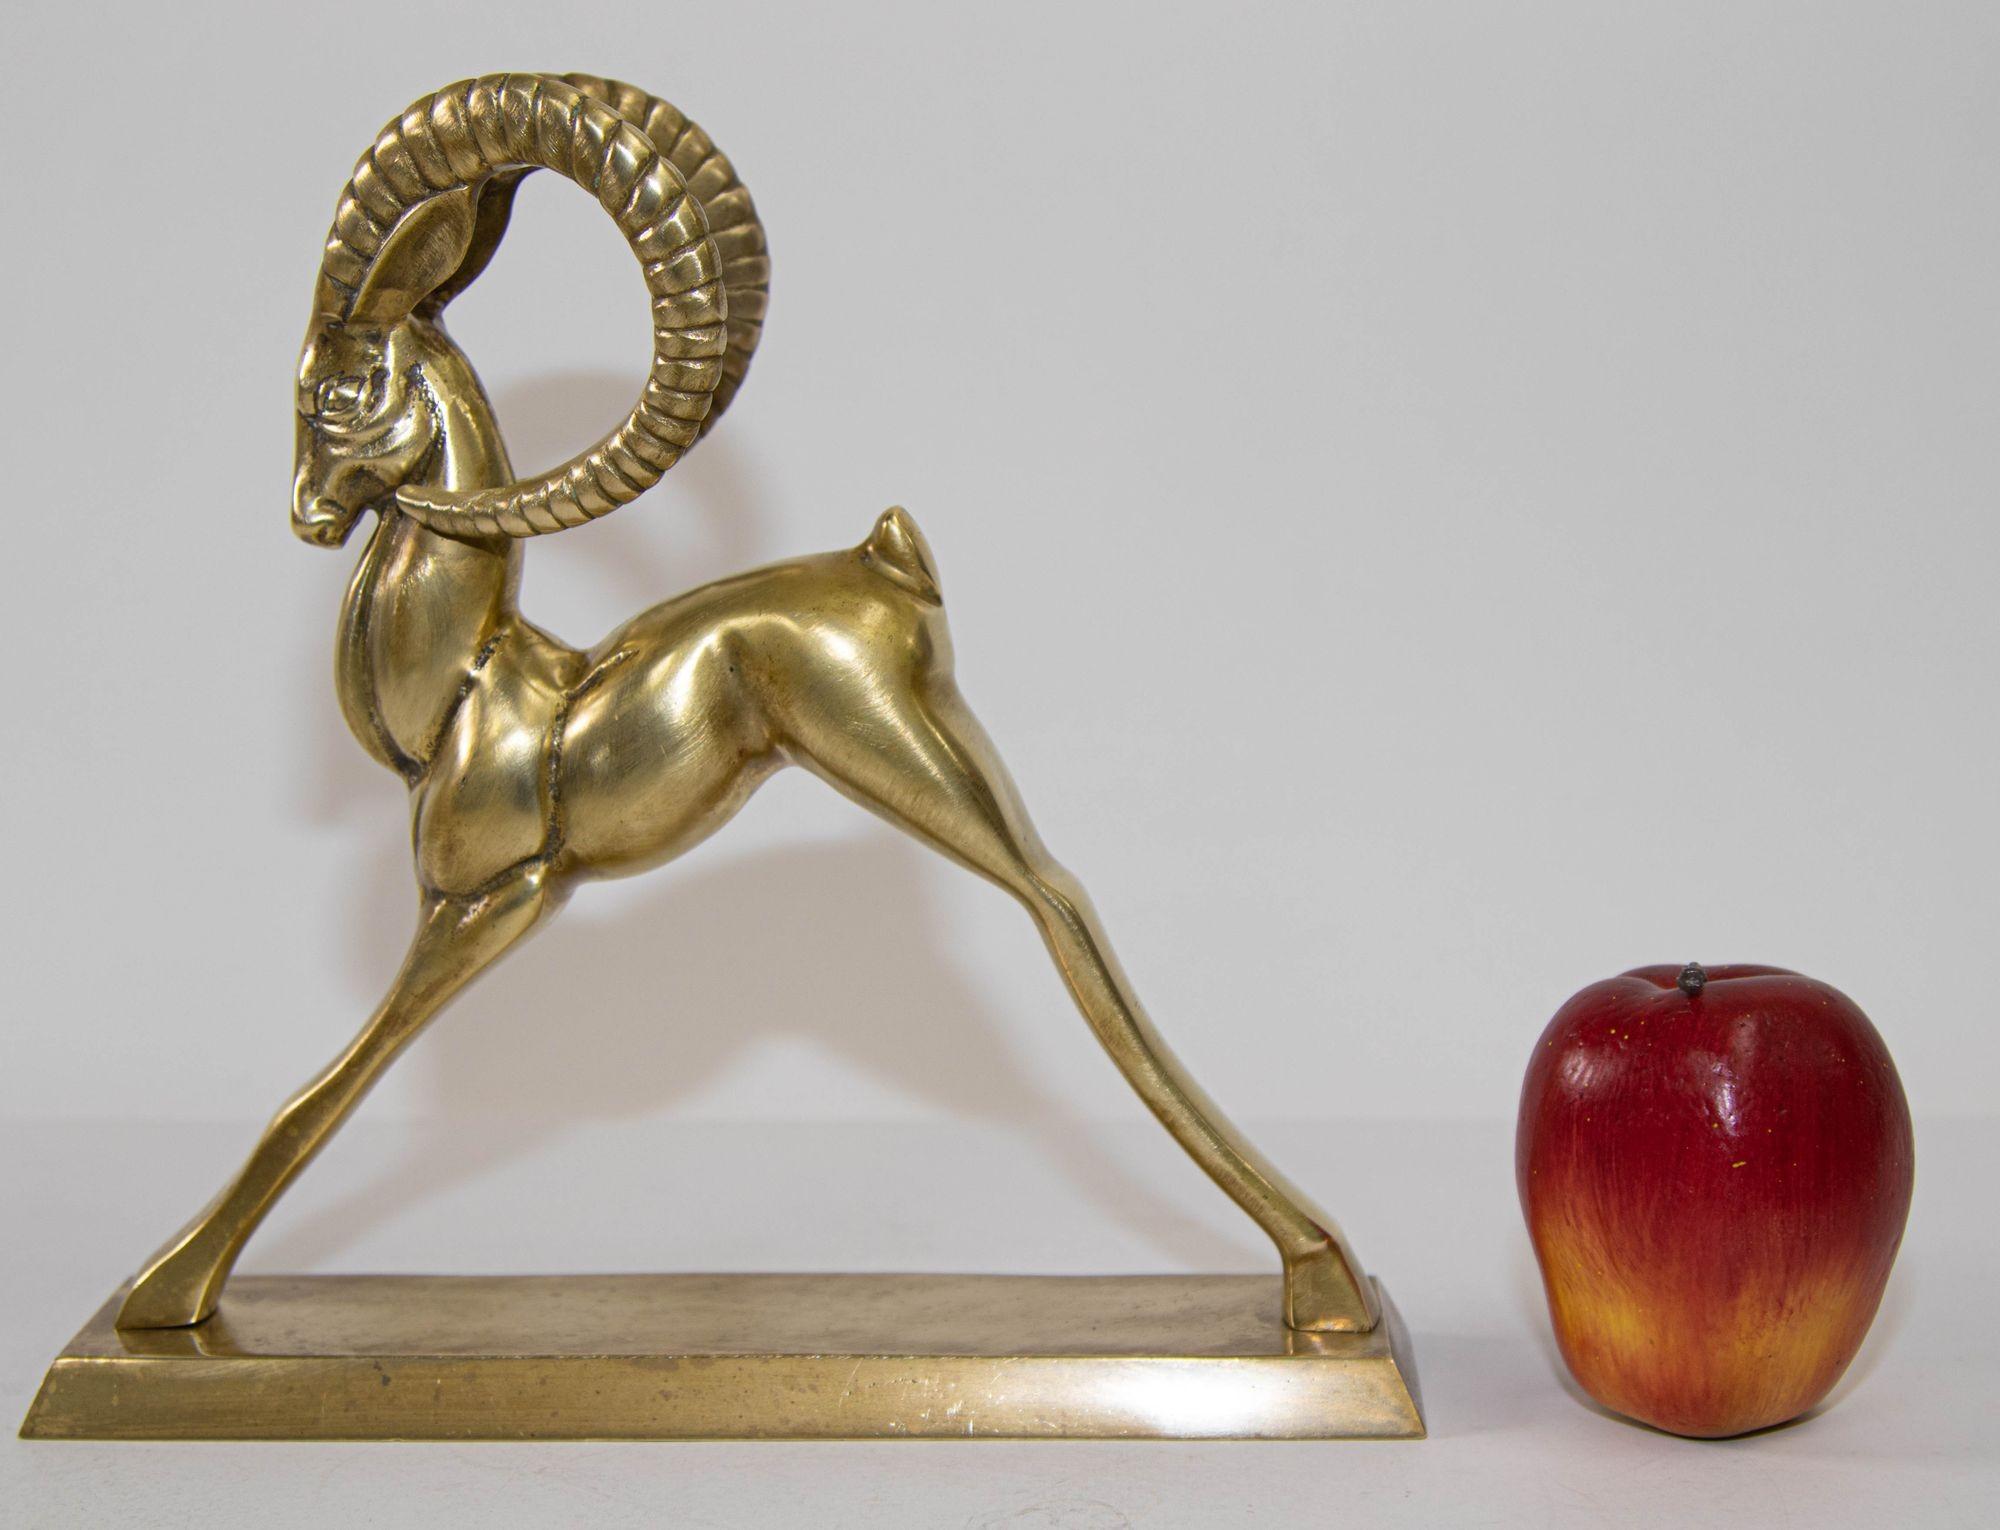 Vintage French Art Deco Style Sculpture of Brass Ibex Antelope 3